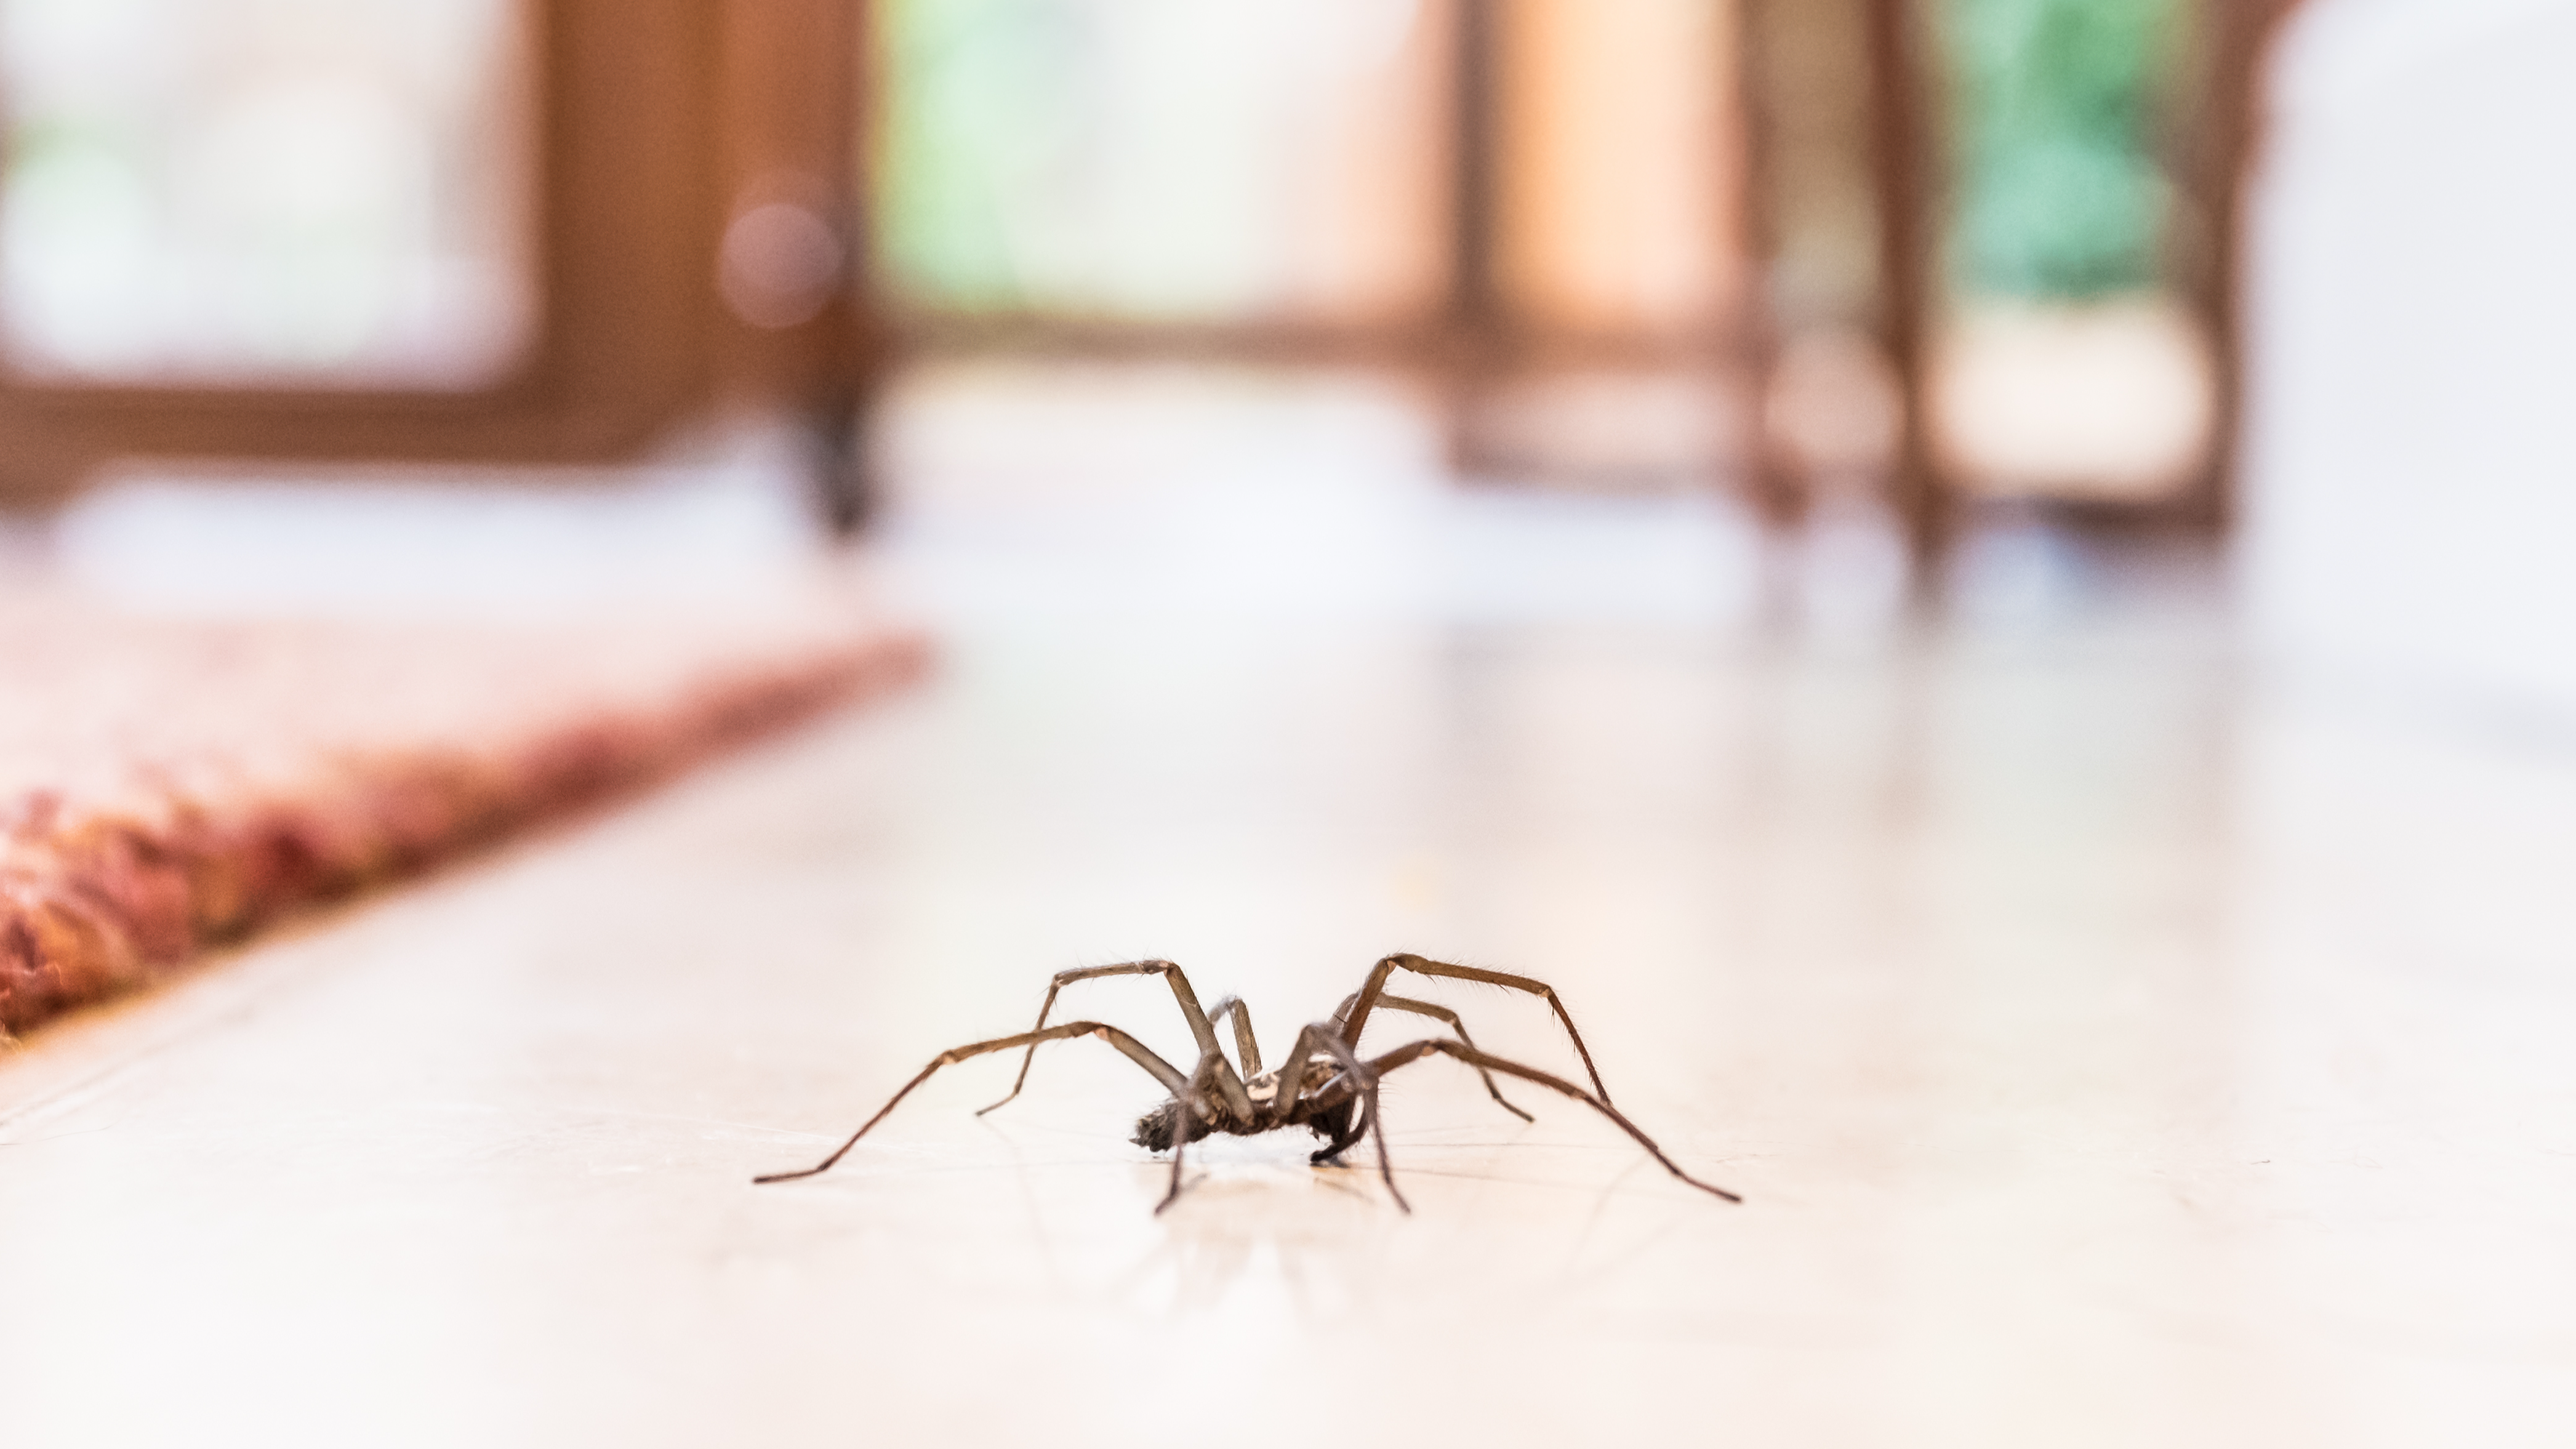 Spiders that invade our homes as months turn colder and damper